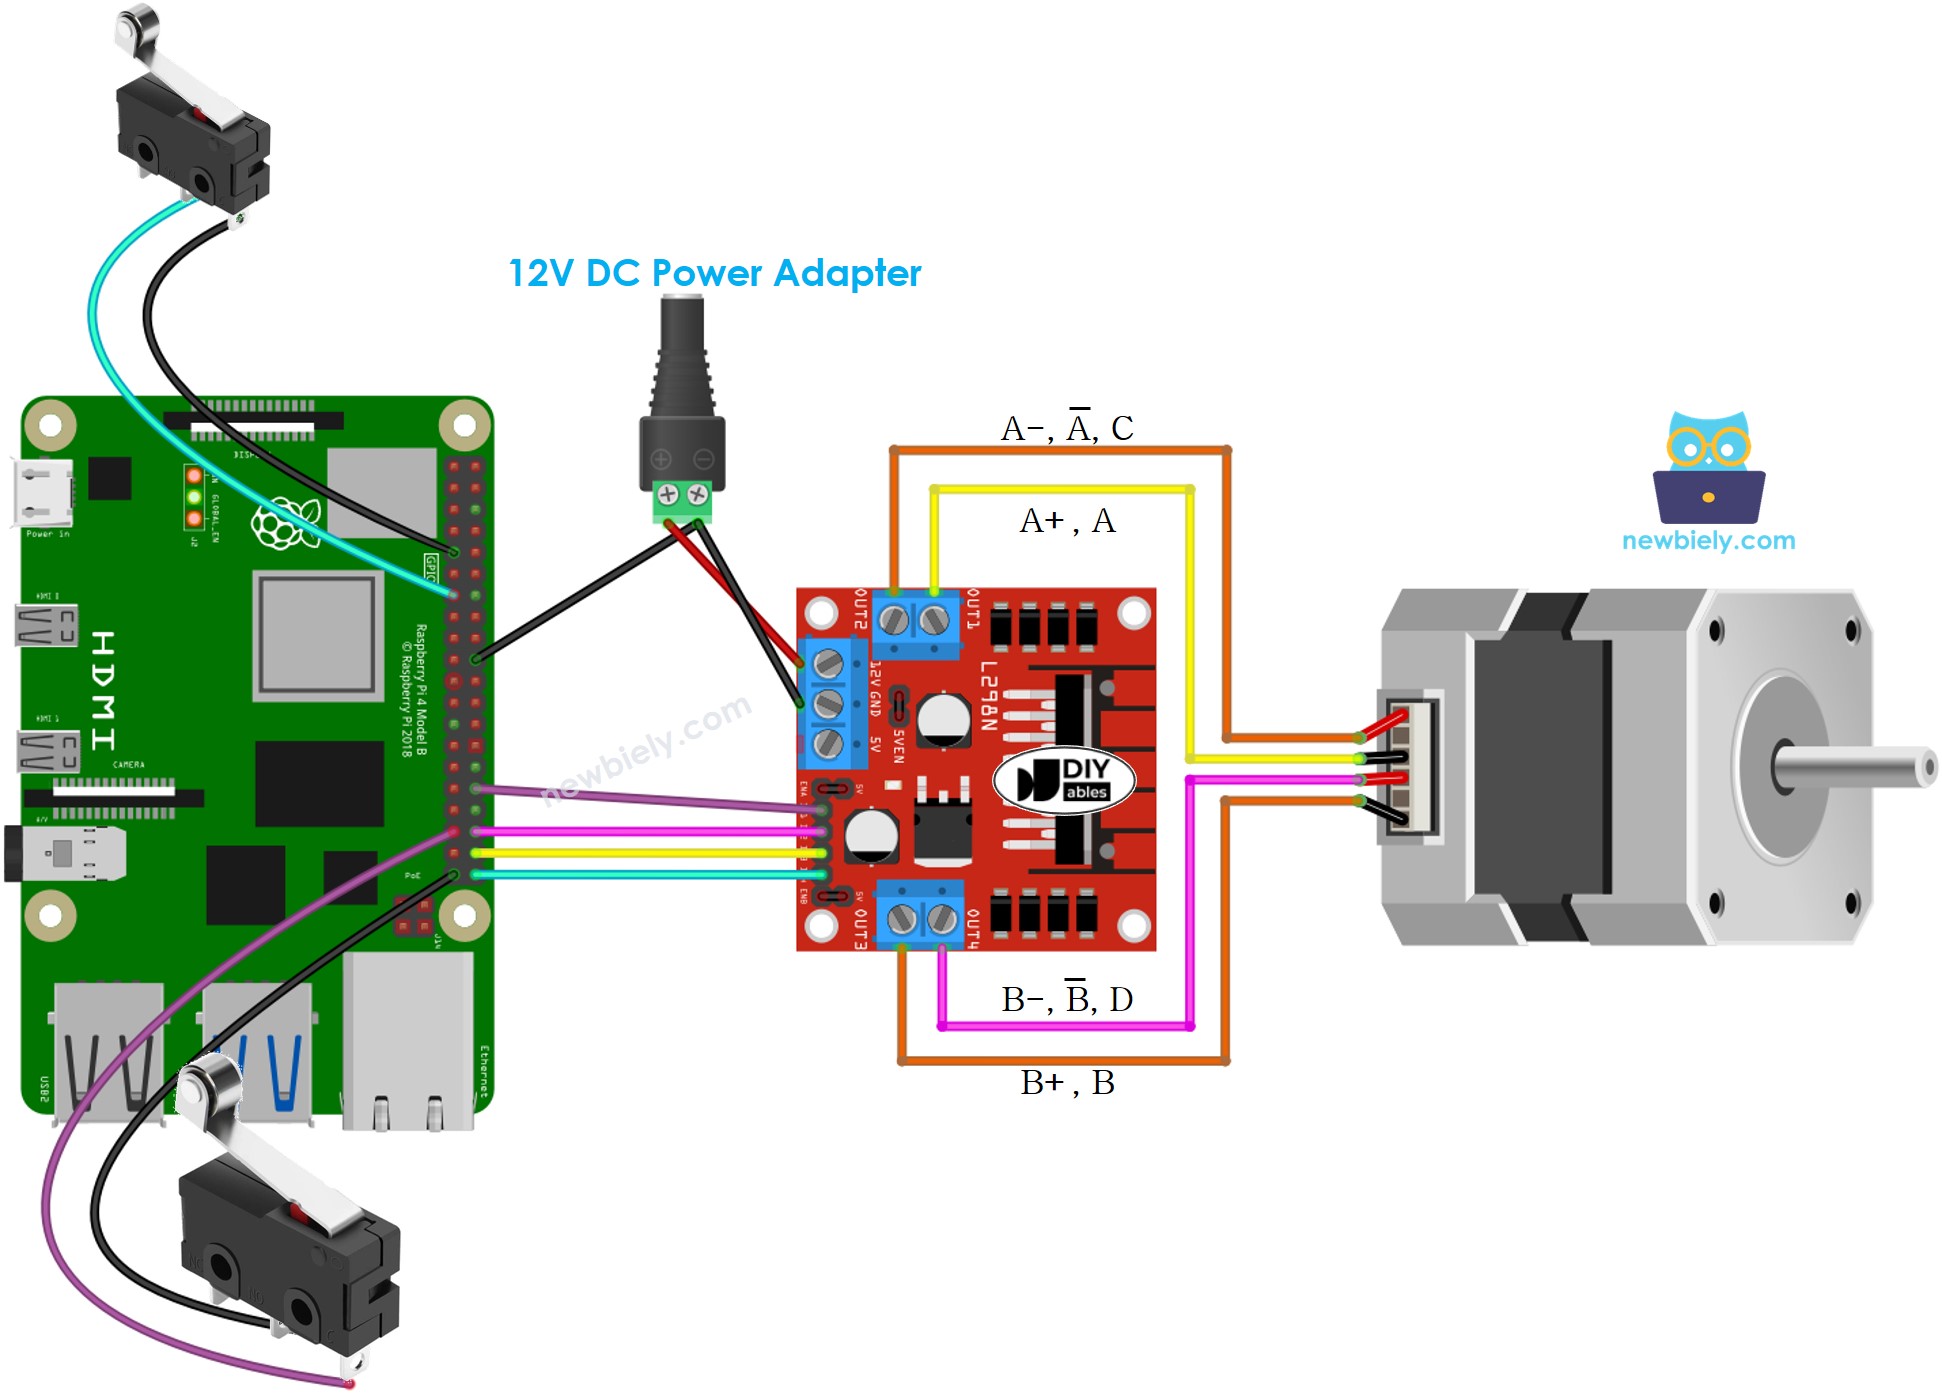 The wiring diagram between Raspberry Pi and stepper motor and two limit switches